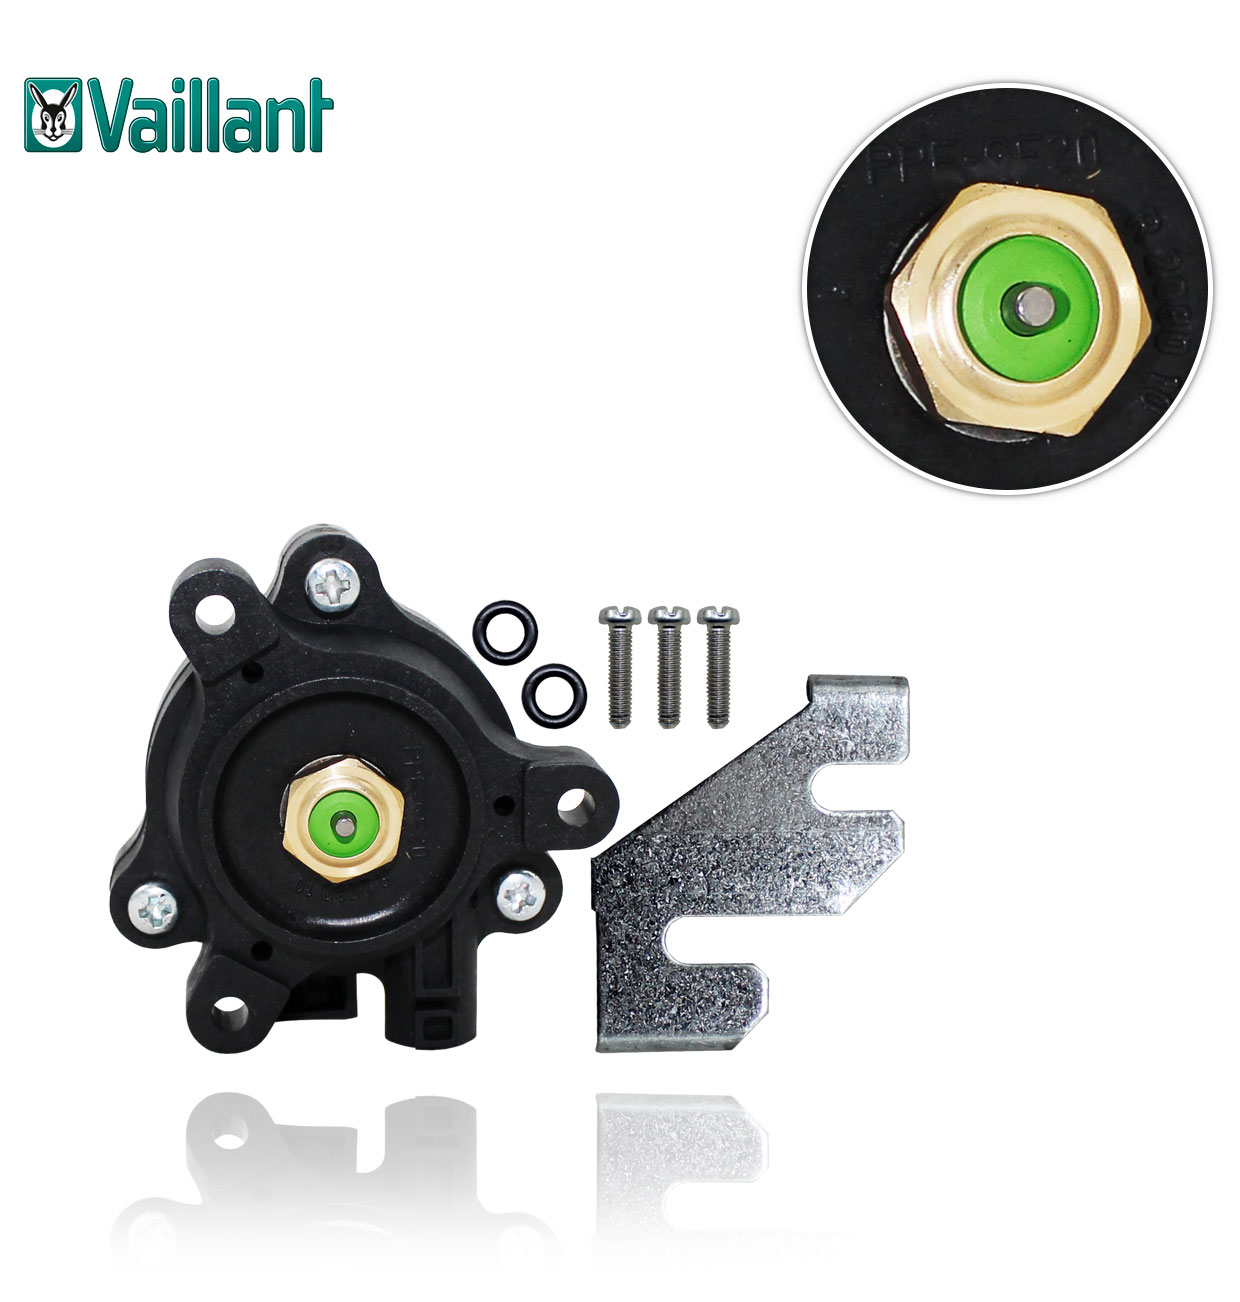 DIFFERENTIAL PRESSURE SWITCH (FLOW SWITCH) VAILLANT 151045 / 151017